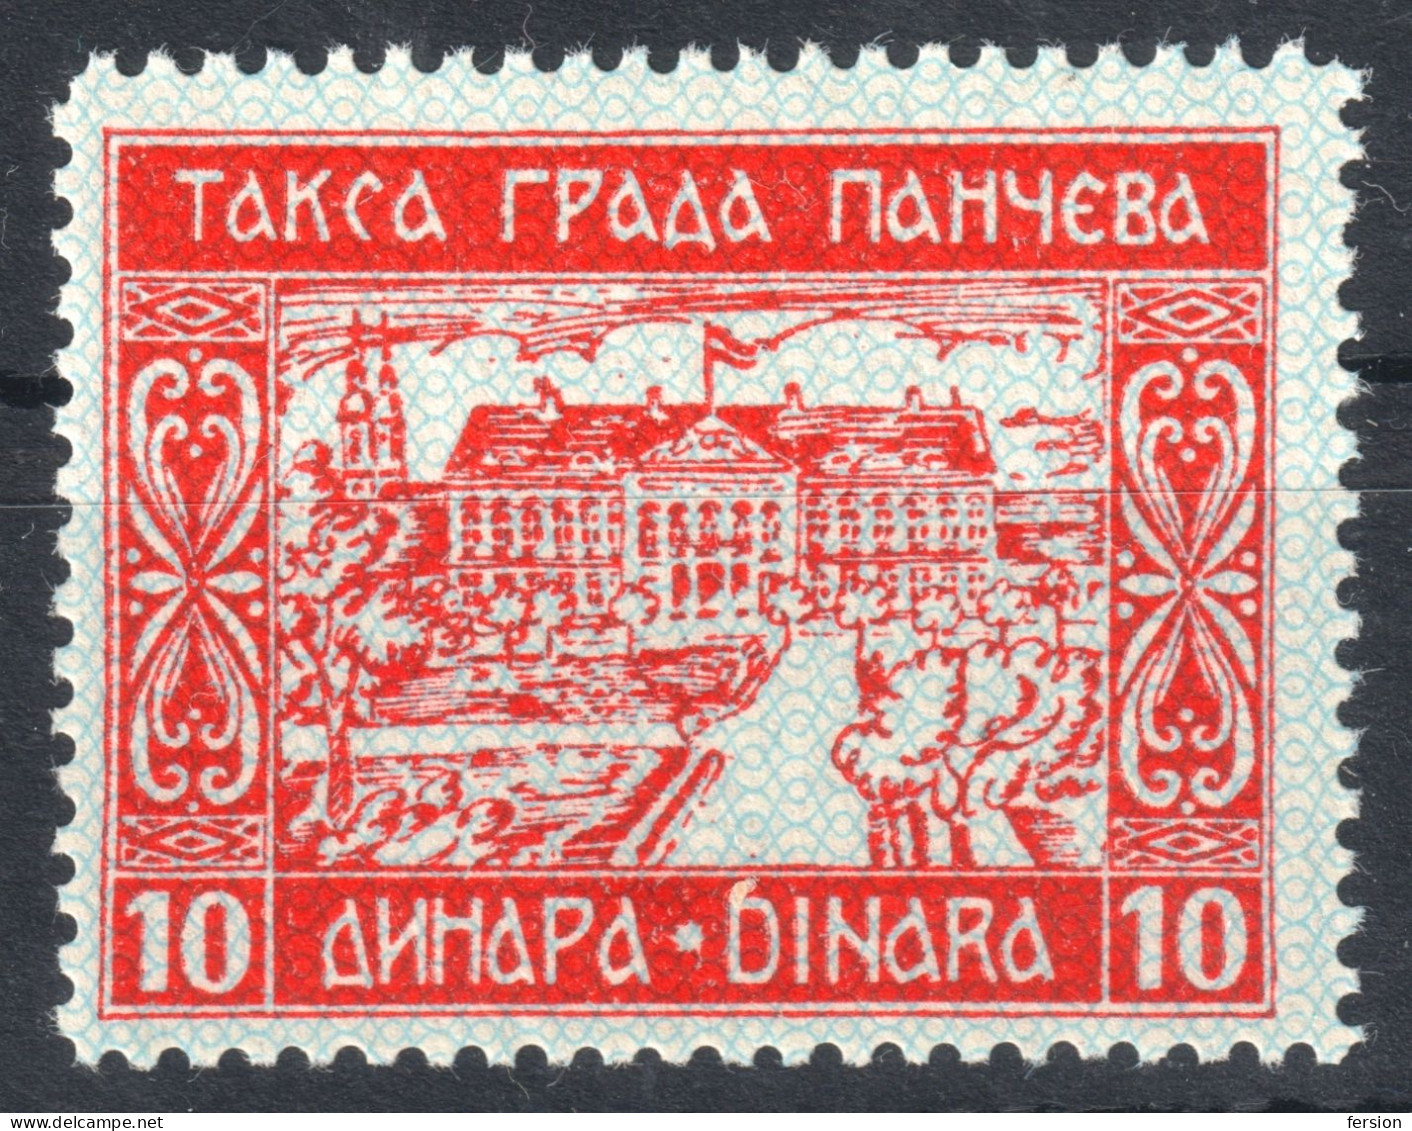 PANCEVO CITY TOWN House Church Cathedral / LOCAL Revenue Tax Stamp 10 Din Yugoslavia Serbia Vojvodina 1939 - Officials